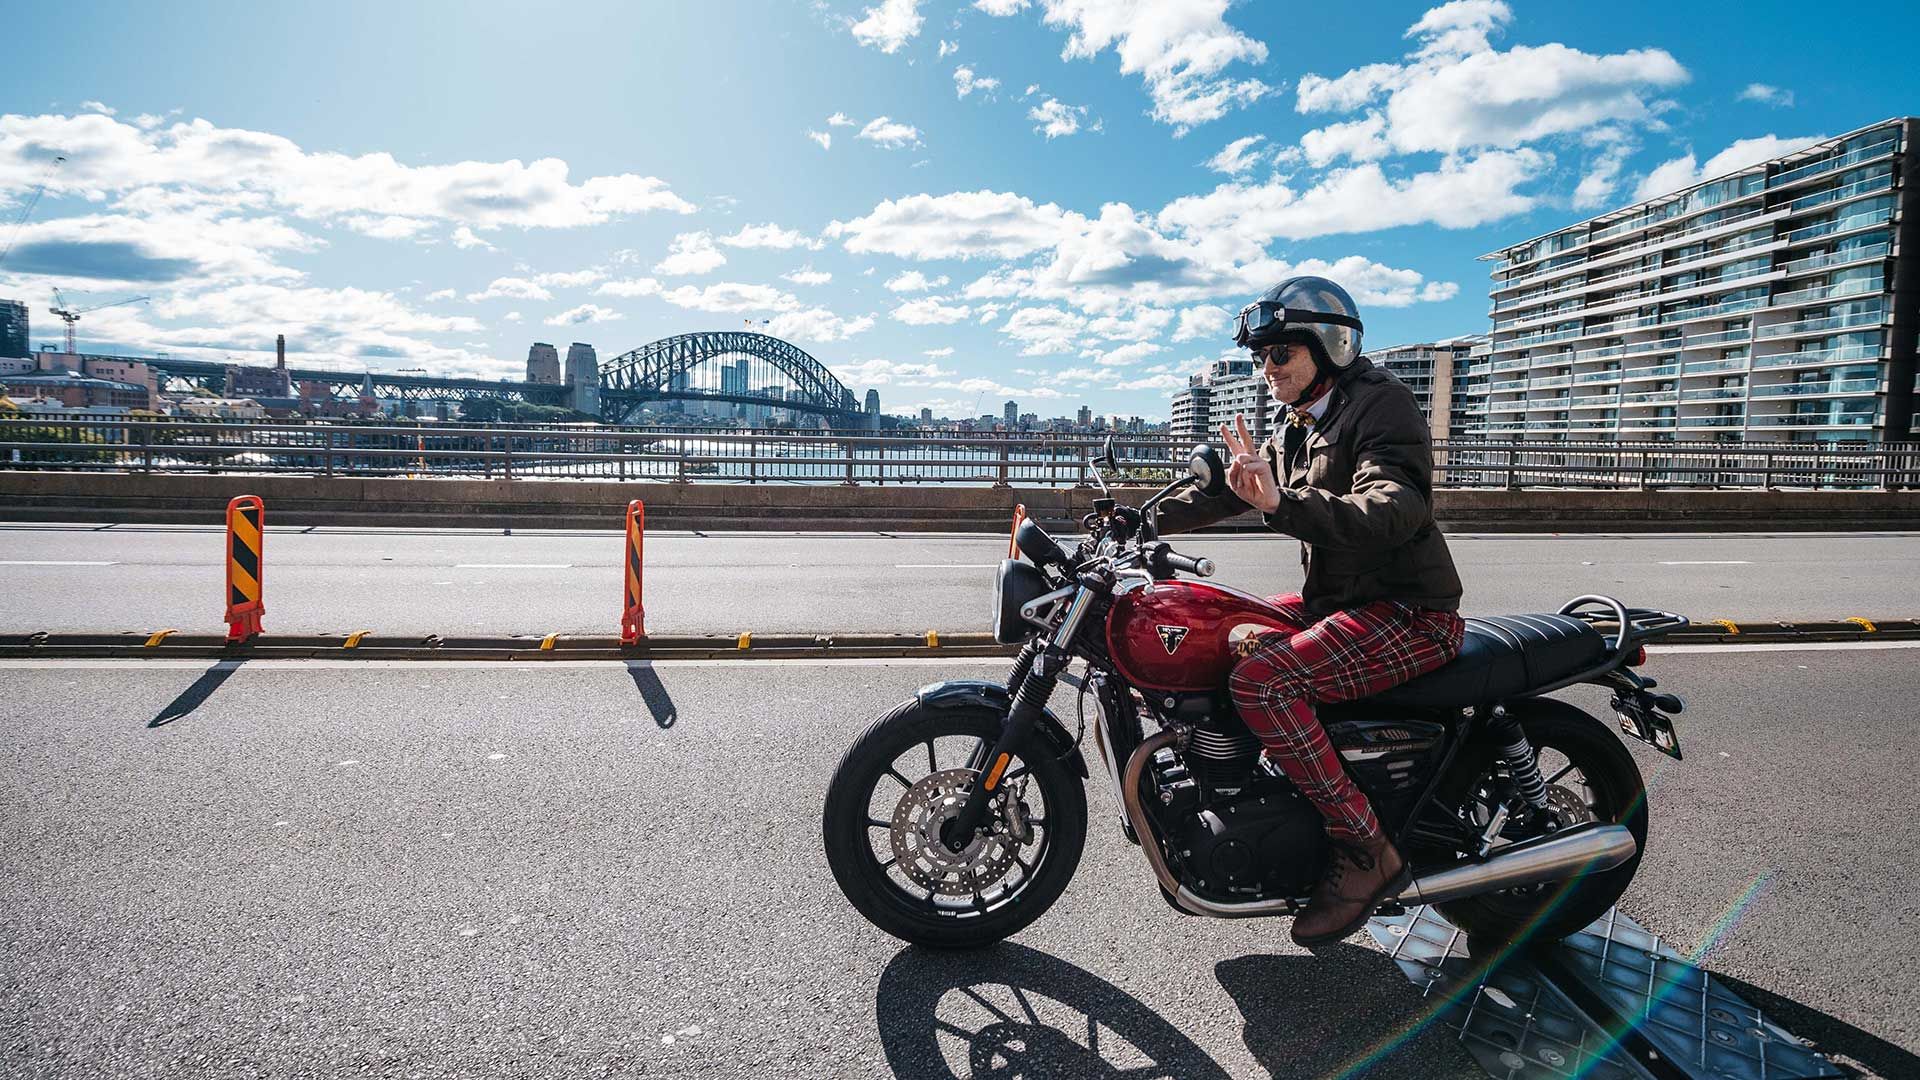 Motorcyclist dressed in dapper attire, saluting the camera with a V-sign. The Sydney Harbour Bridge is in the background.